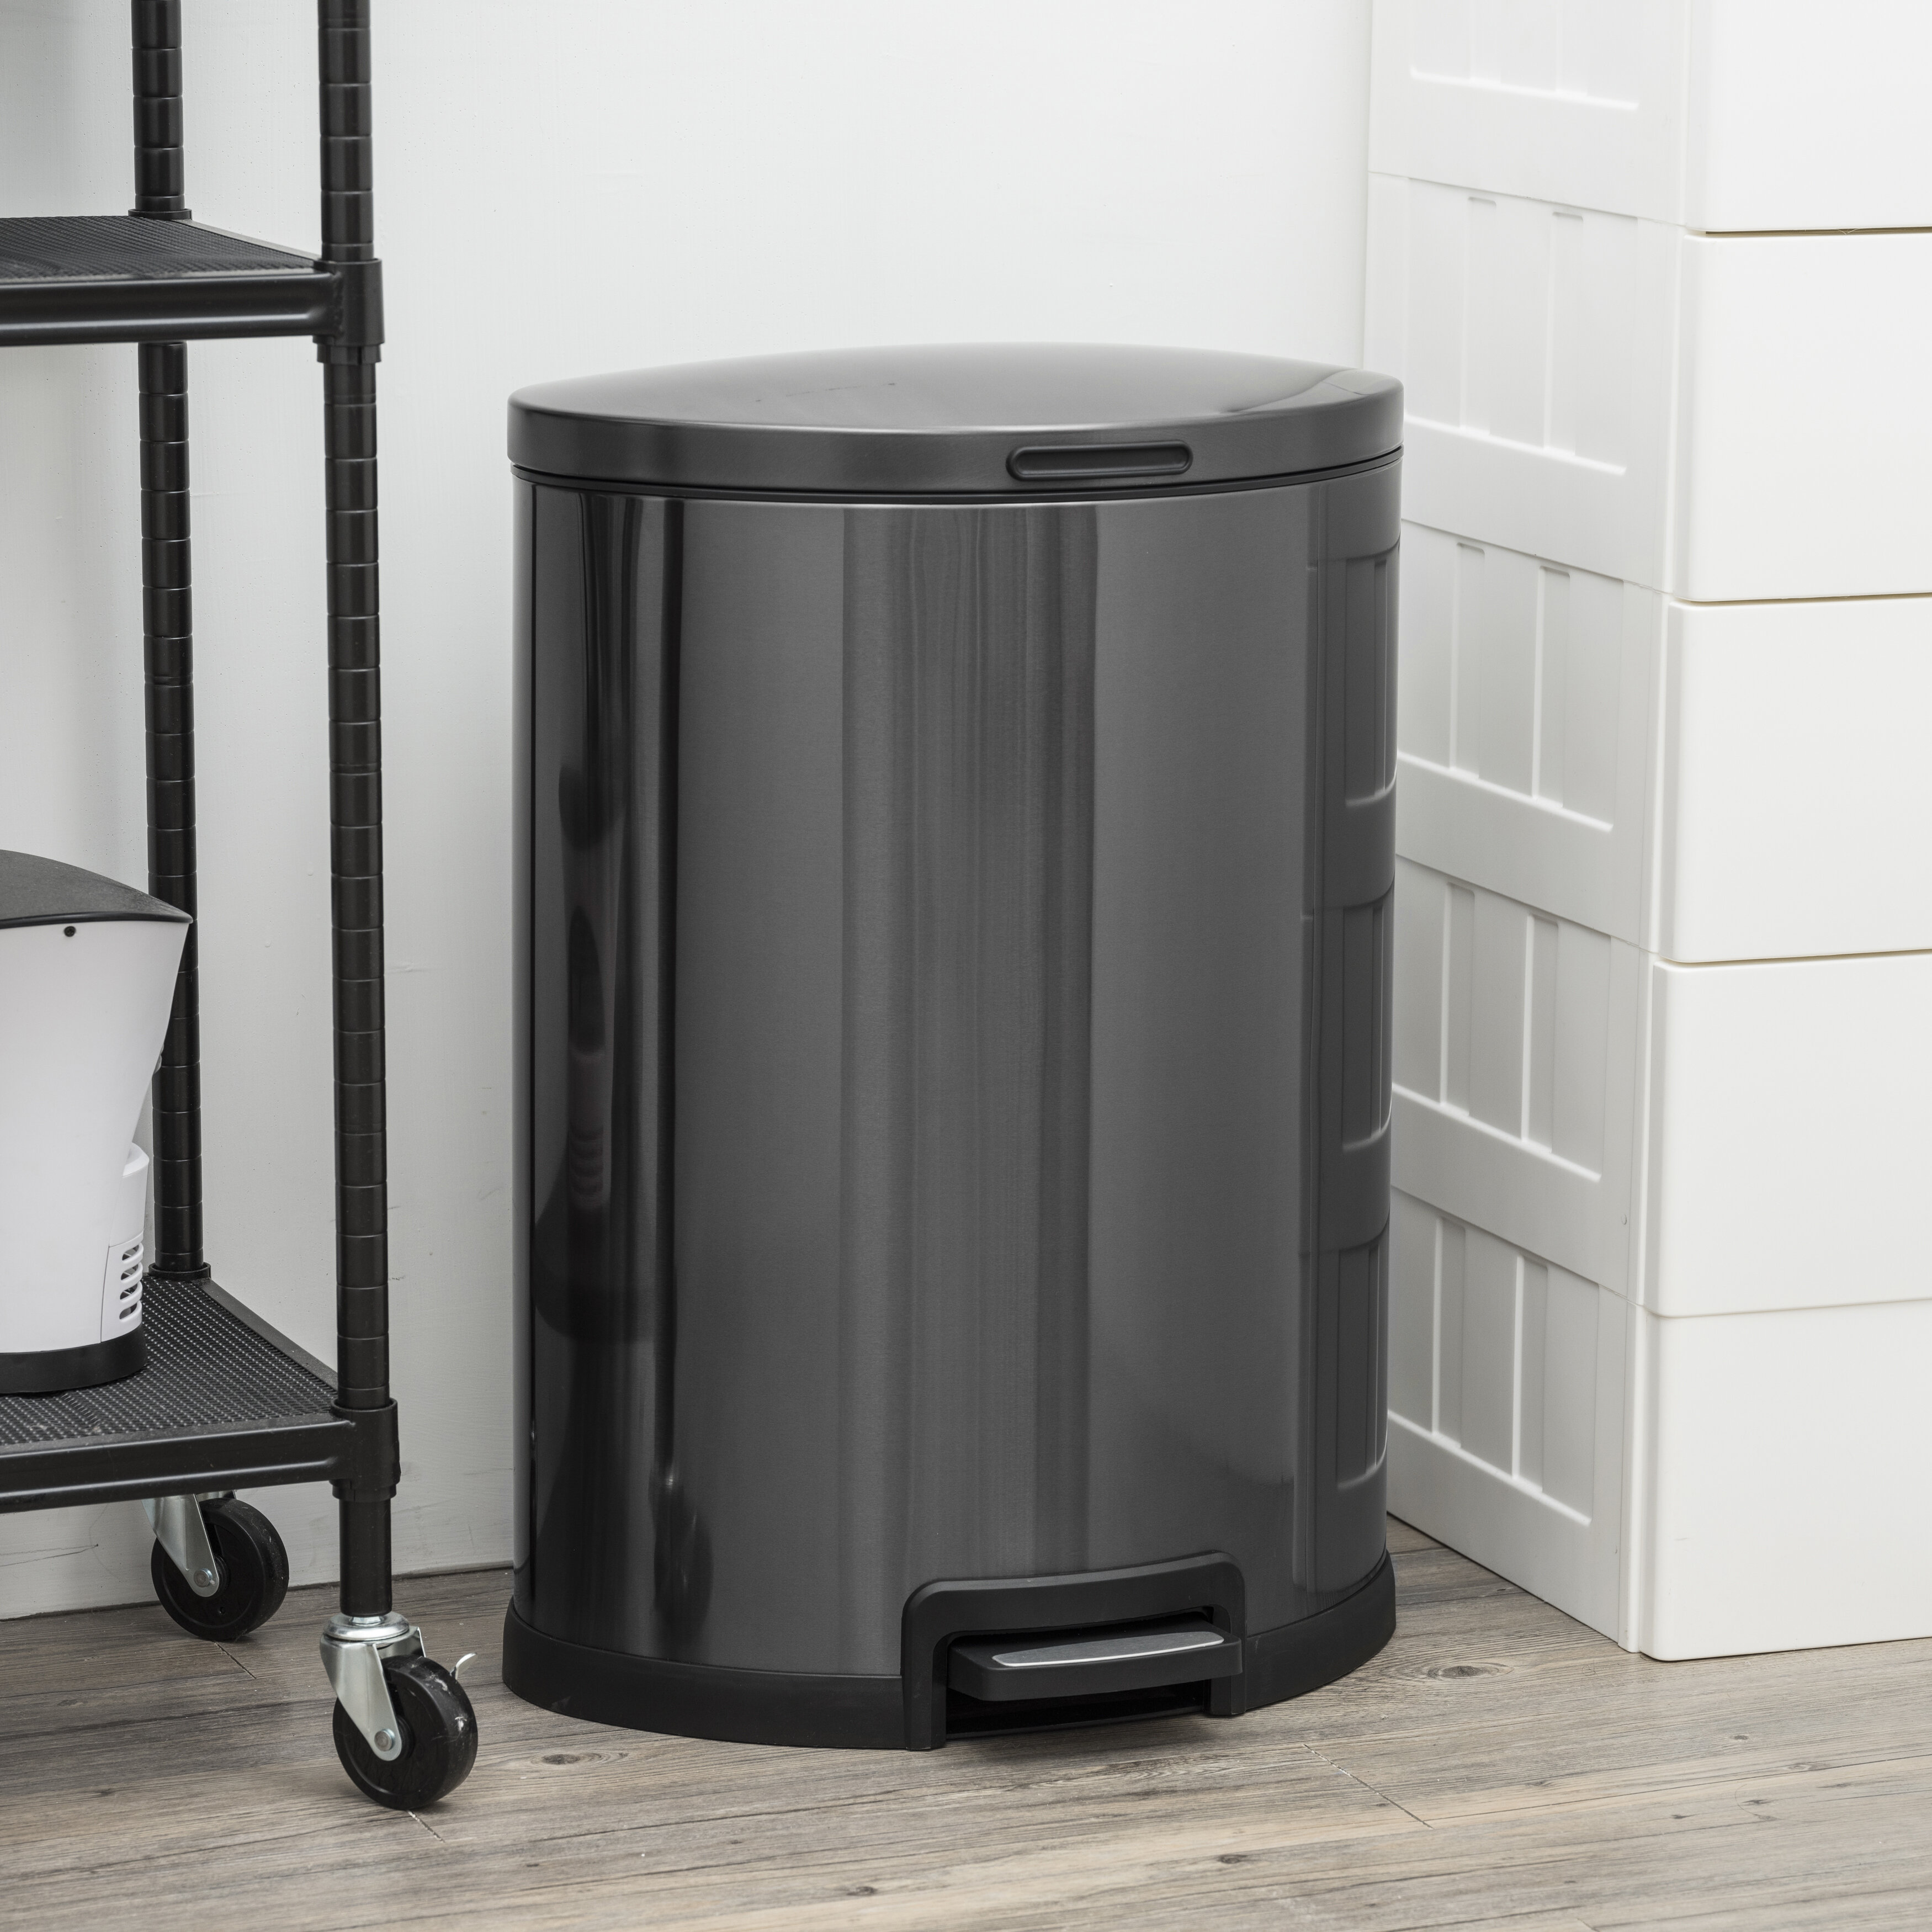 HomeZone 45 L Black Stainless Steel Semi Round Kitchen Trash Can Step 12 Gallon 